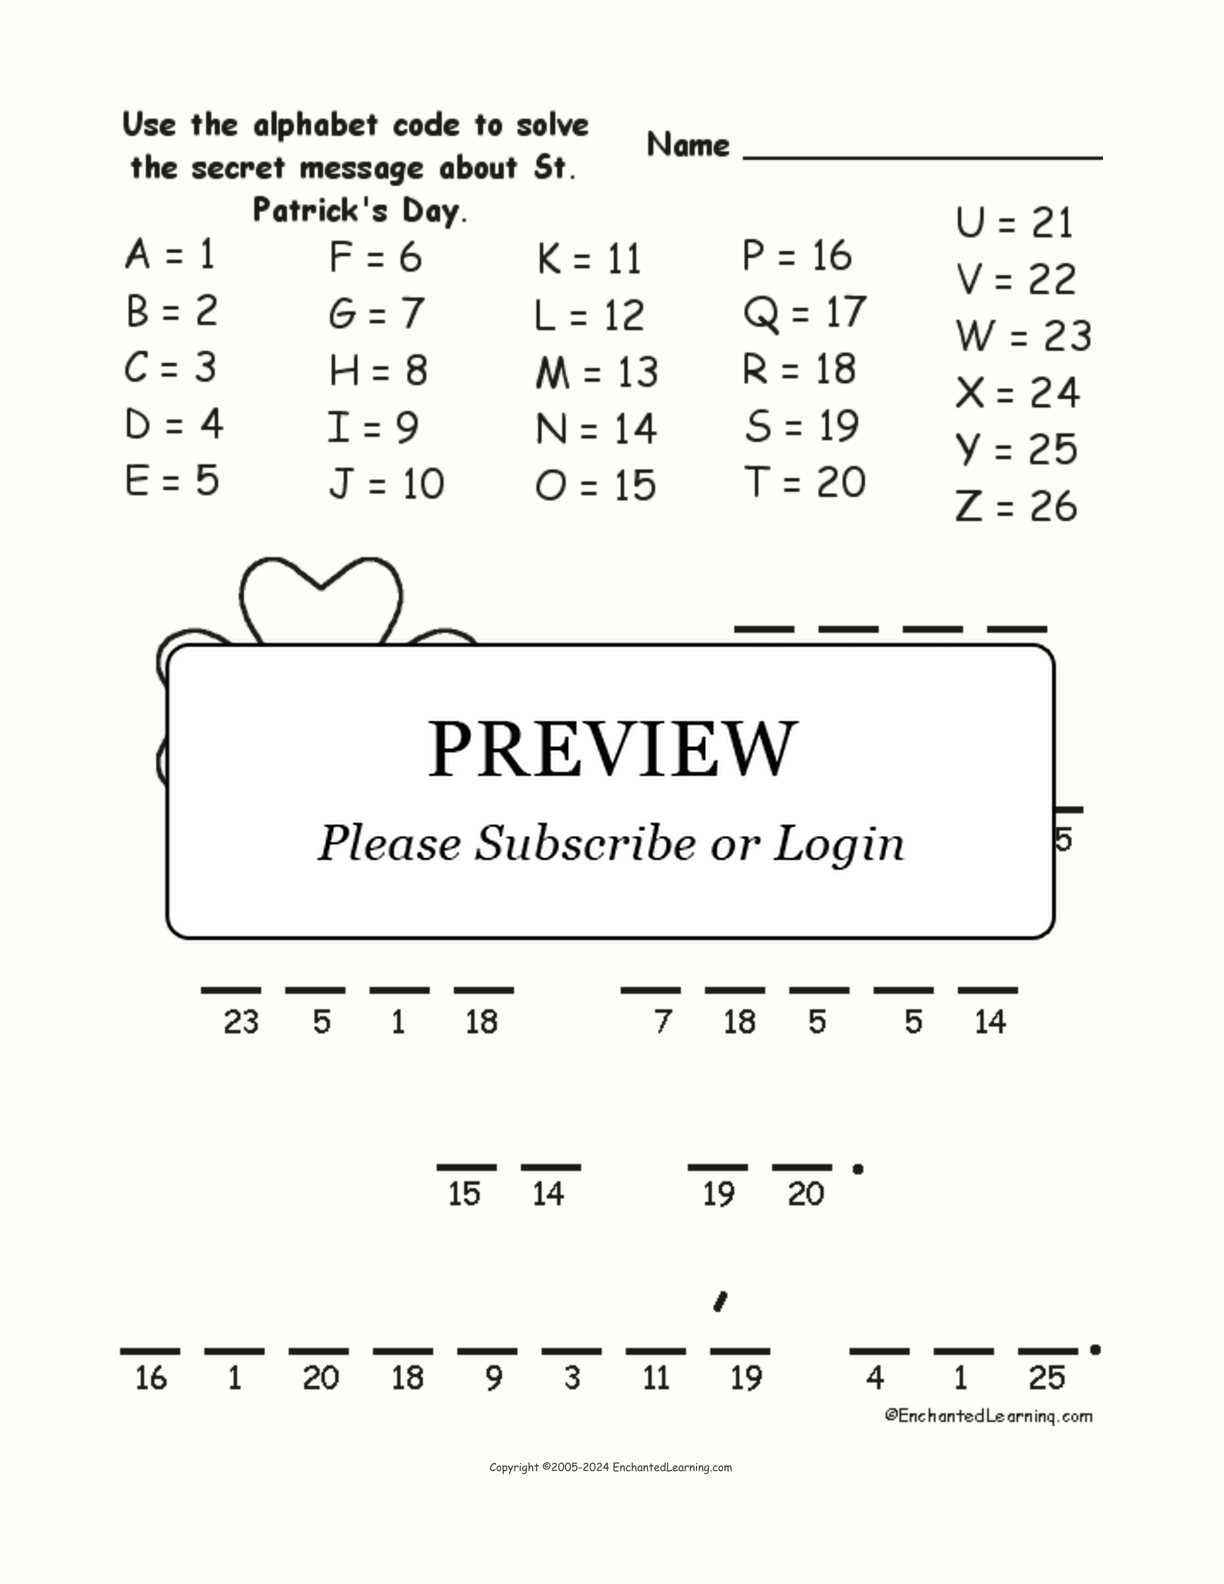 St. Patrick's Day Alphabet Code interactive worksheet page 1